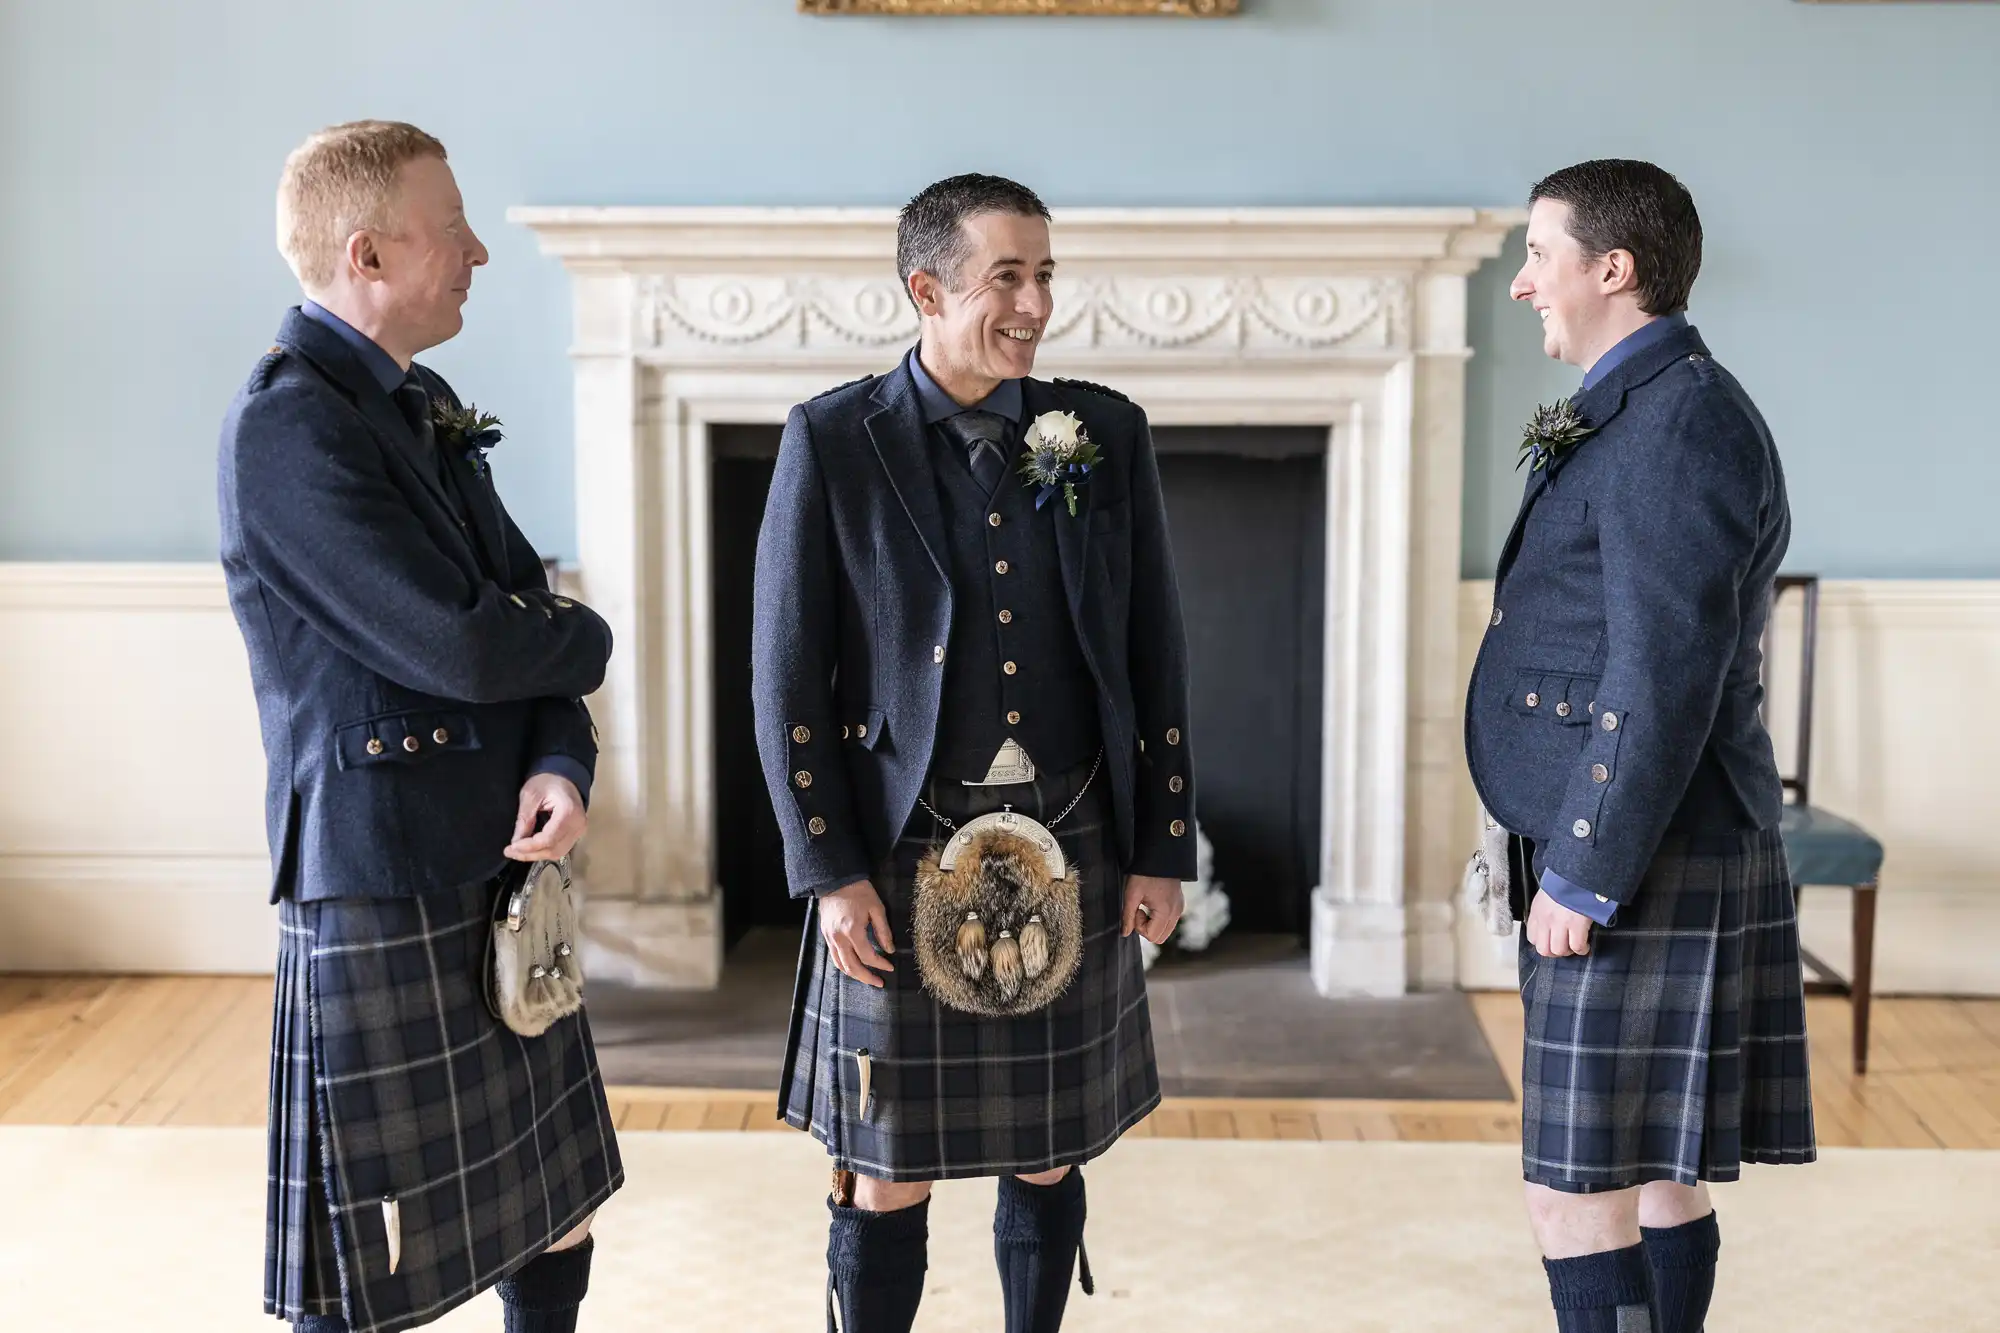 Three men, dressed in traditional Scottish kilts and jackets, stand and laugh together in front of a fireplace in a well-lit room.